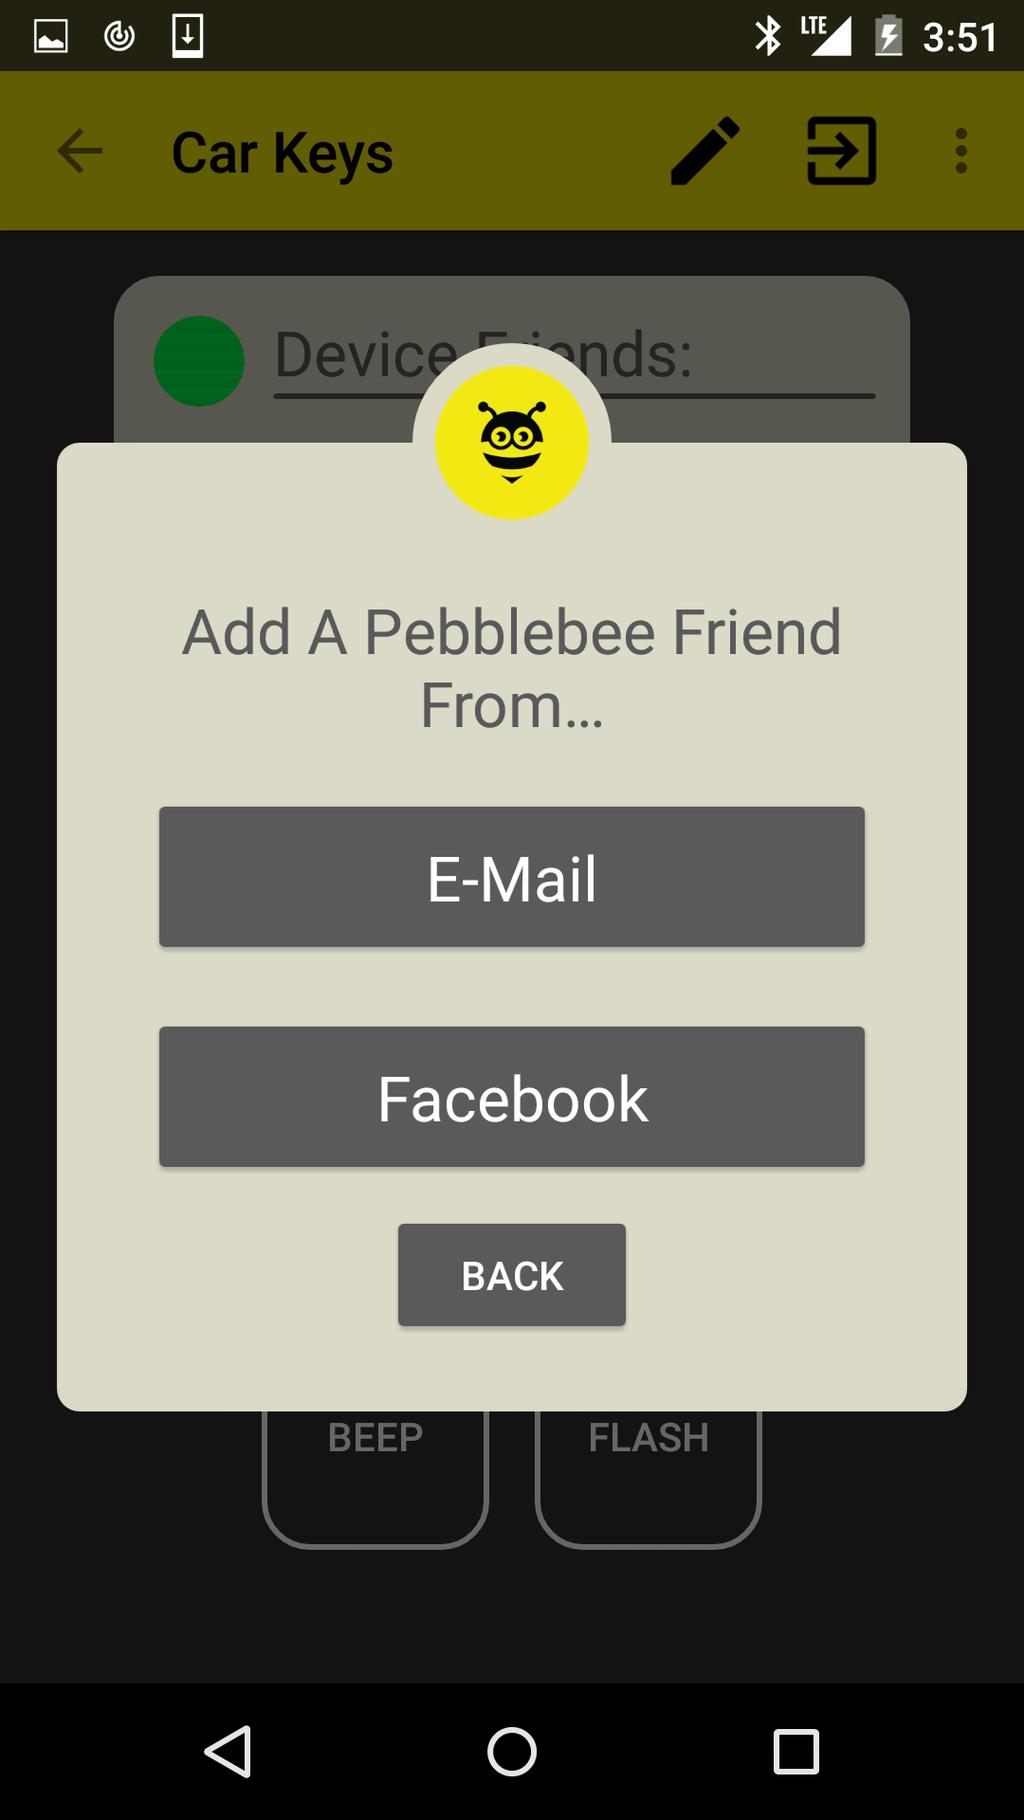 Friends can be added by email or through Facebook 1.